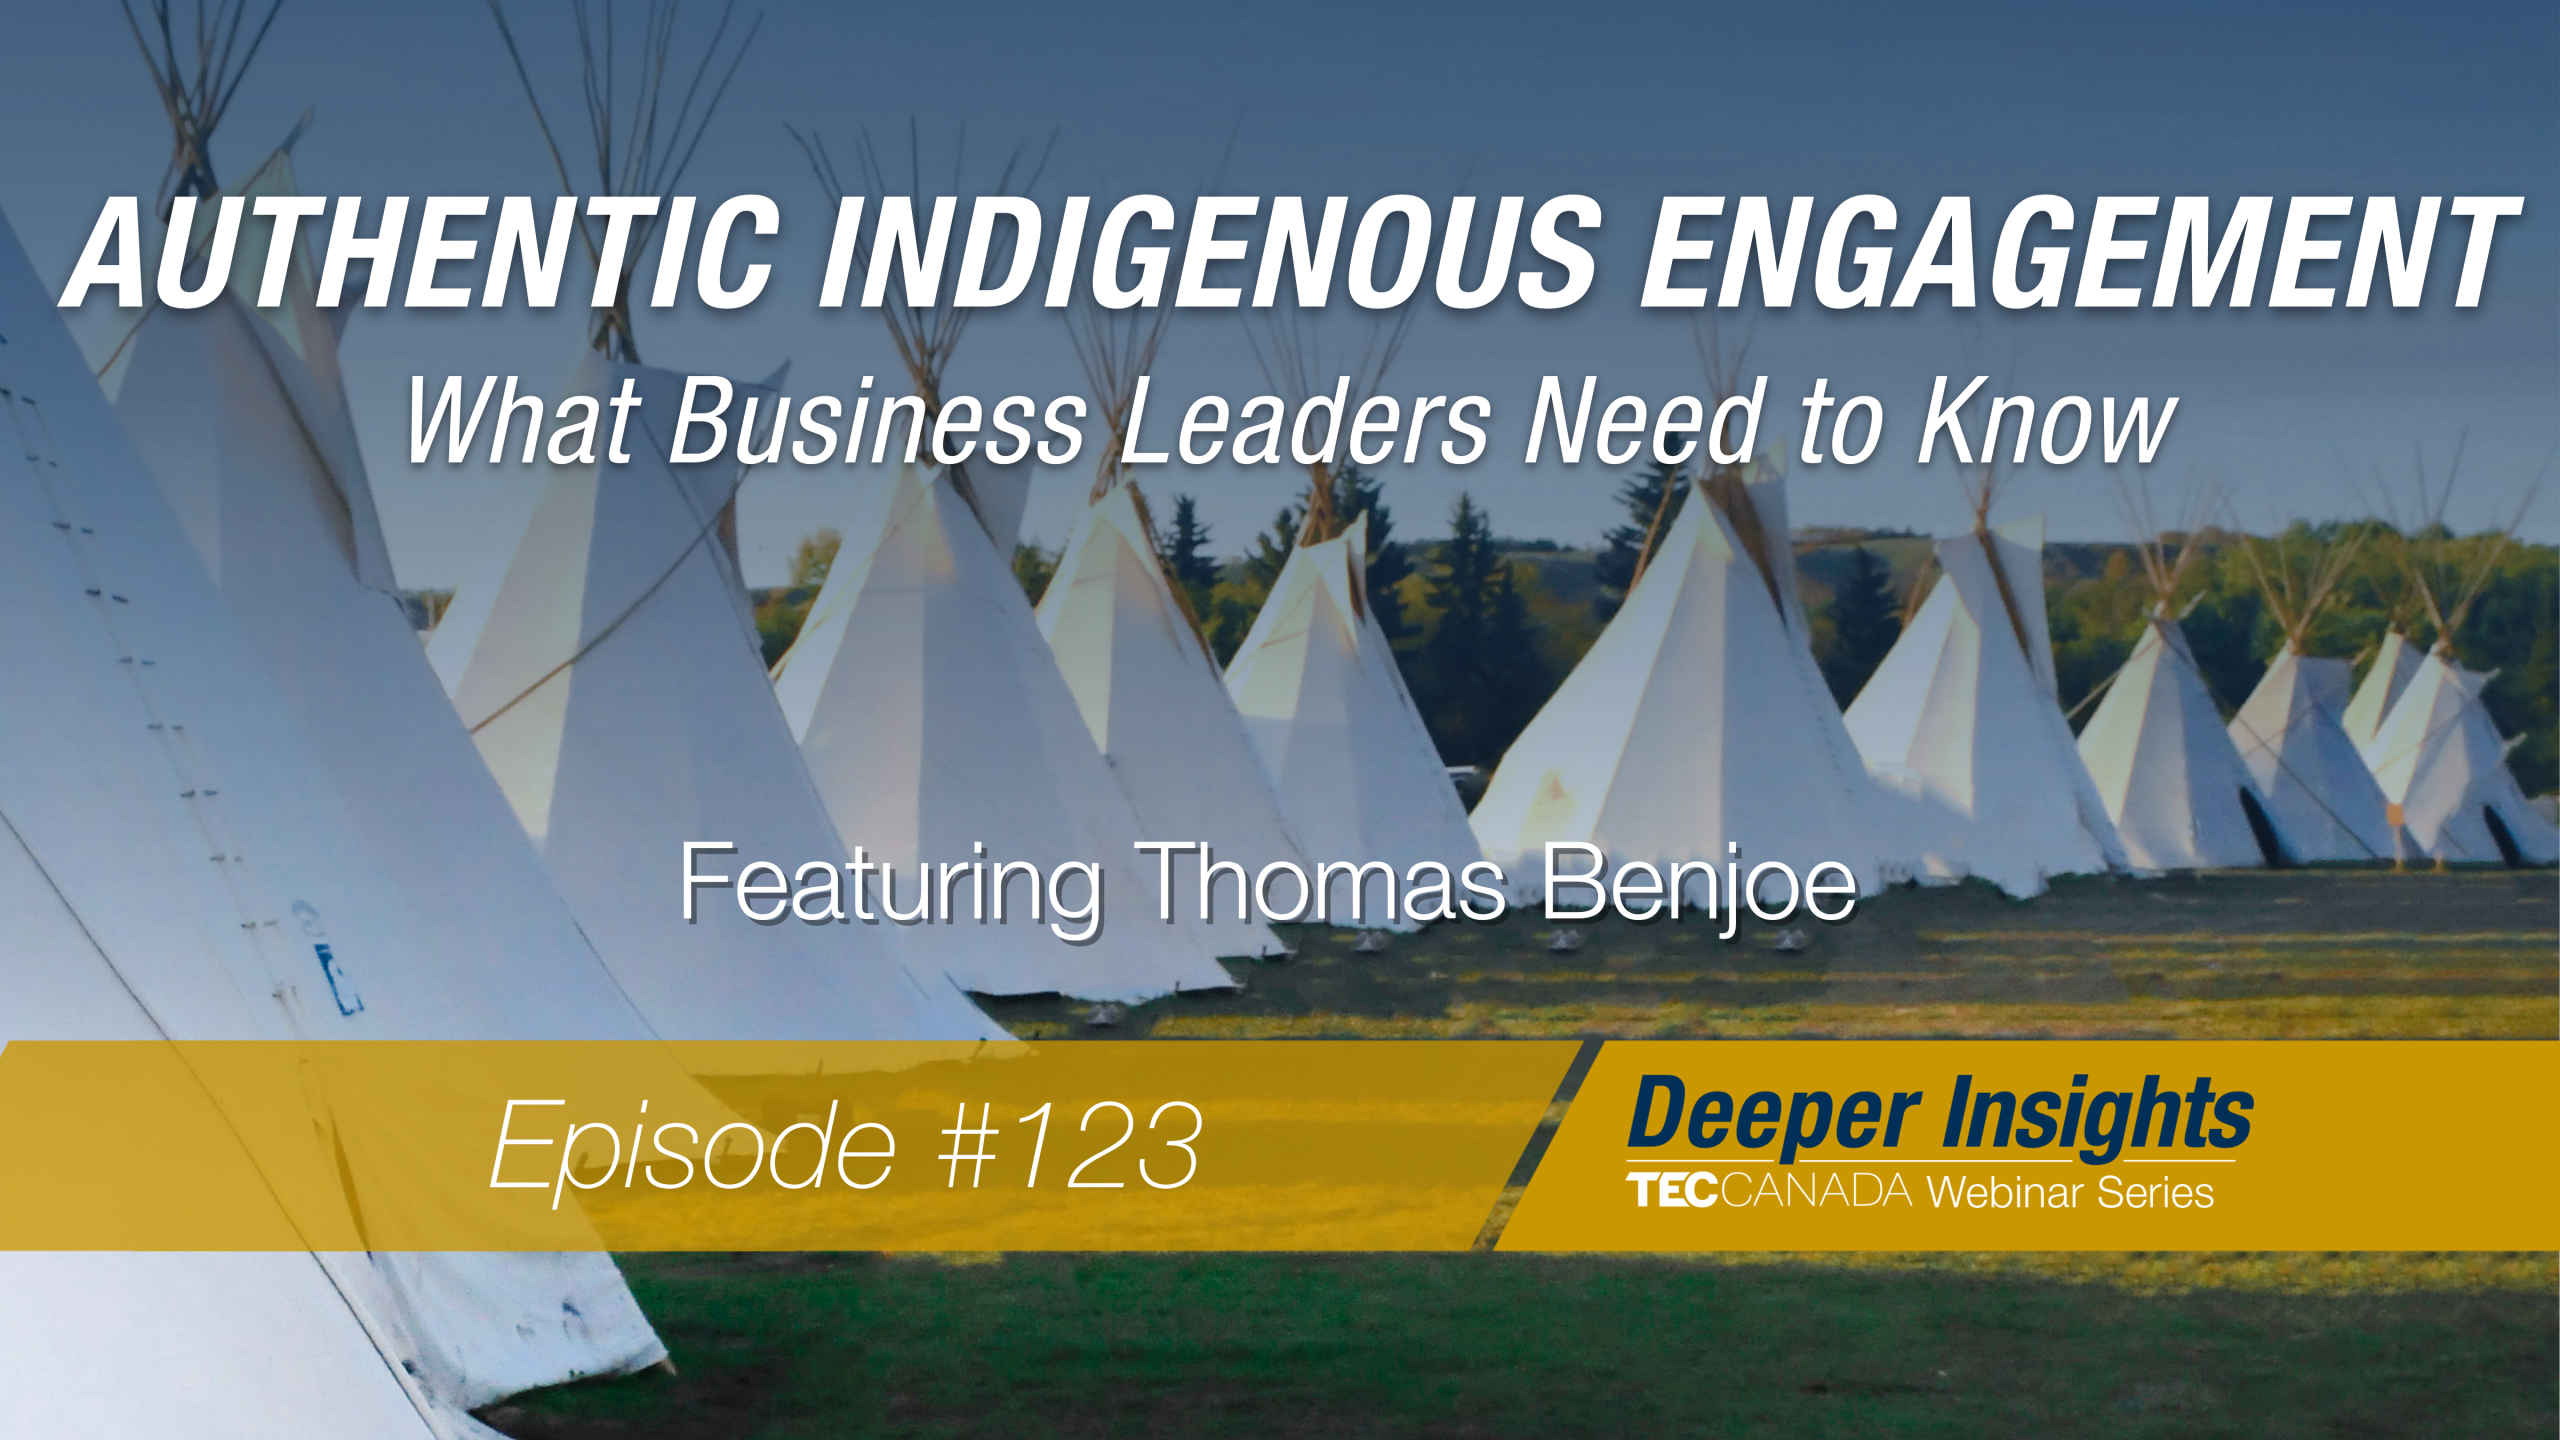 Field of white tipis with overlaying caption: Authentic Indigenous Engagement: What Business Leaders Need to Know. Featuring Thomas Benjoe. Episode #123.